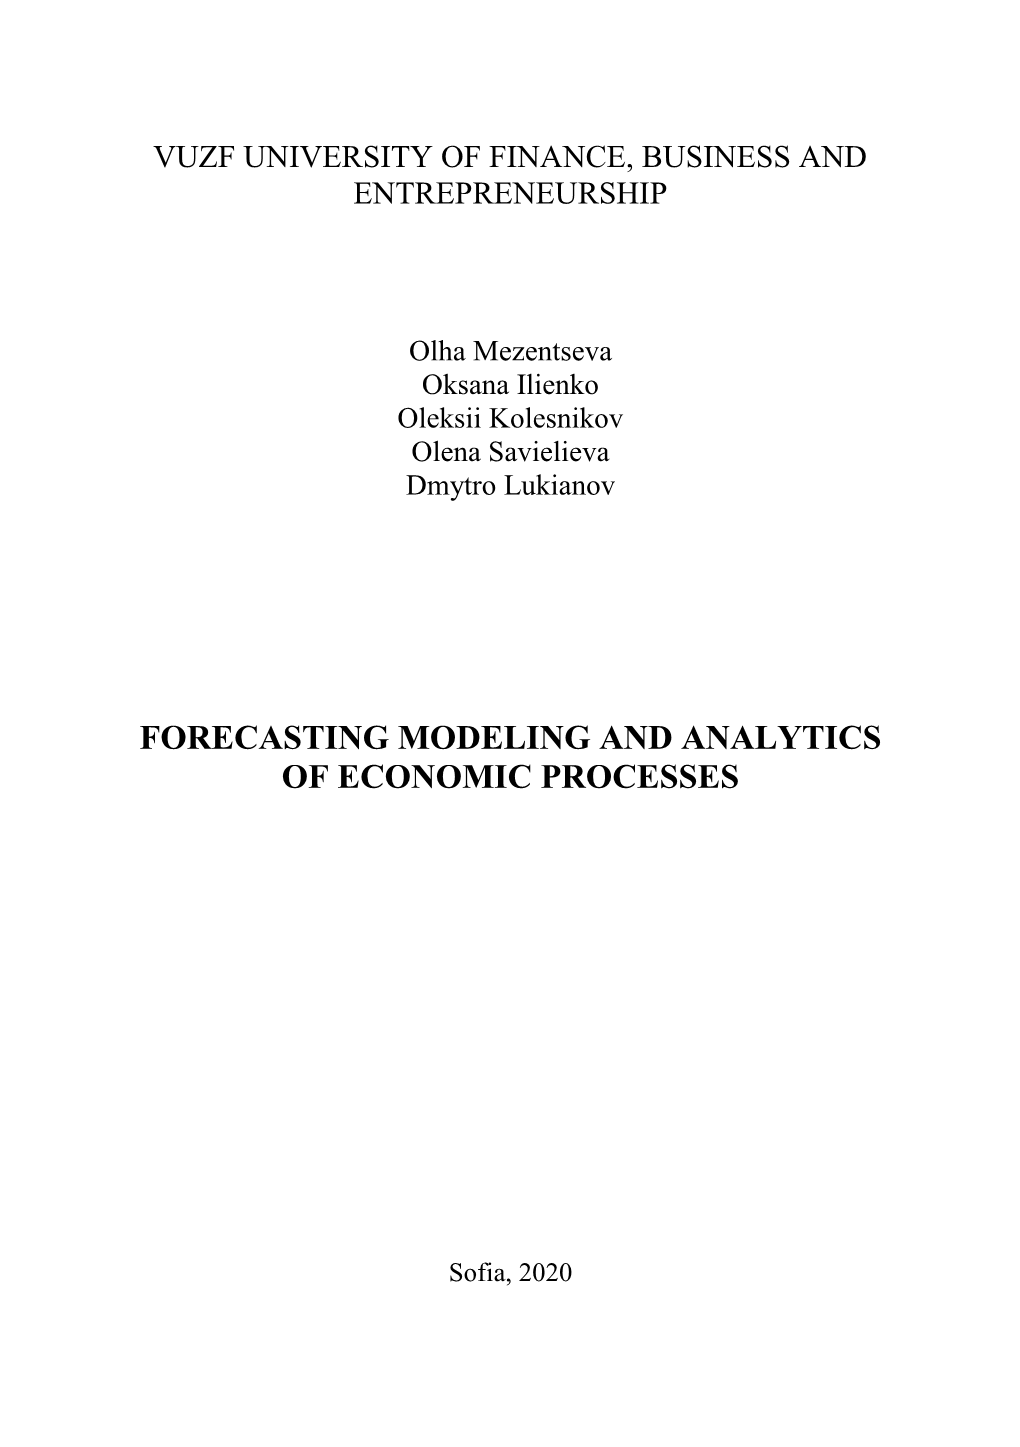 Forecasting Modeling and Analytics of Economic Processes